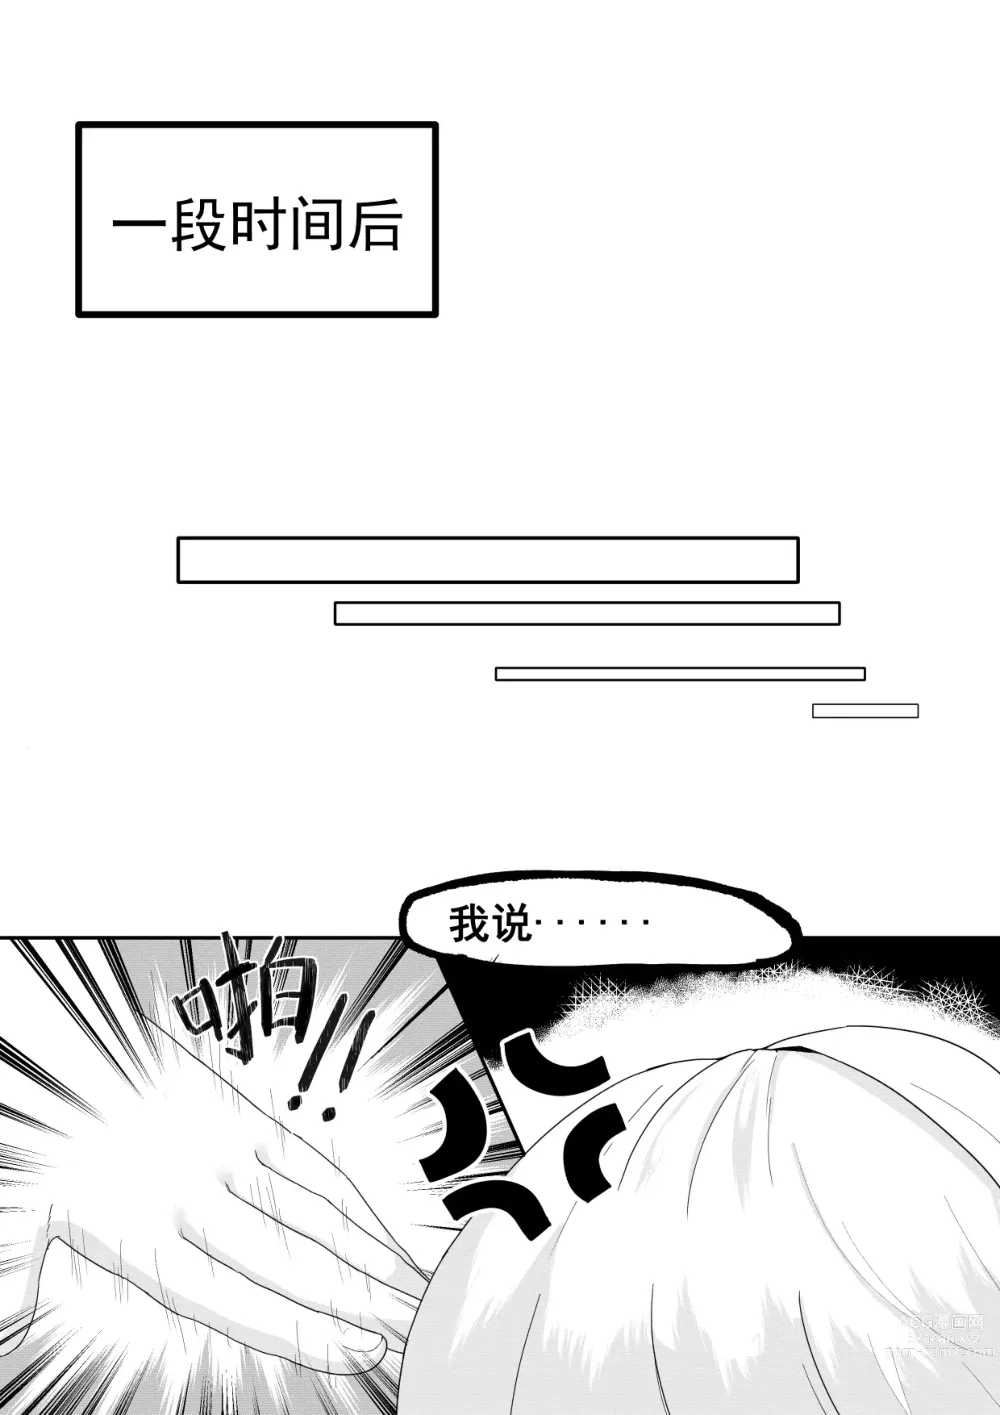 Page 39 of doujinshi Private Visit Time Part 2